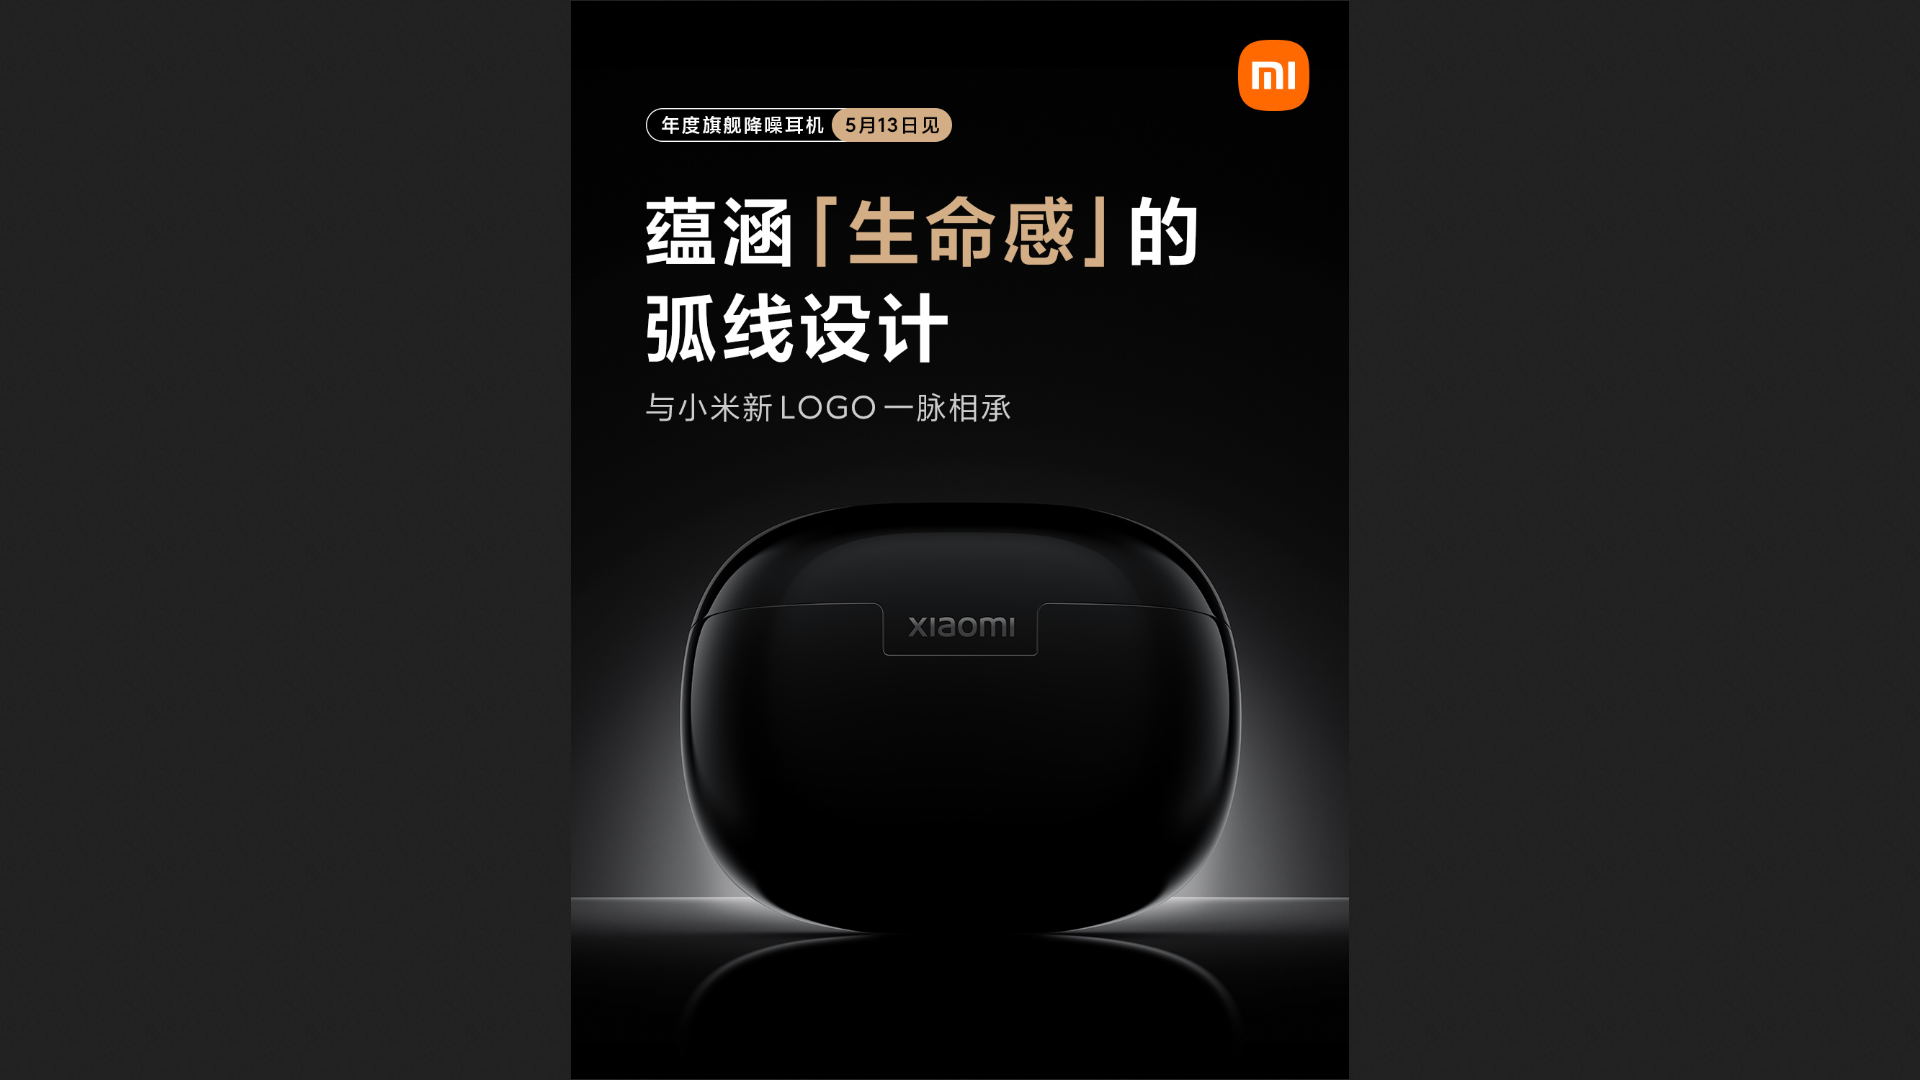 Xiaomi will launch its next pair of noise-cancelling TWS earbuds on May 13, 2021